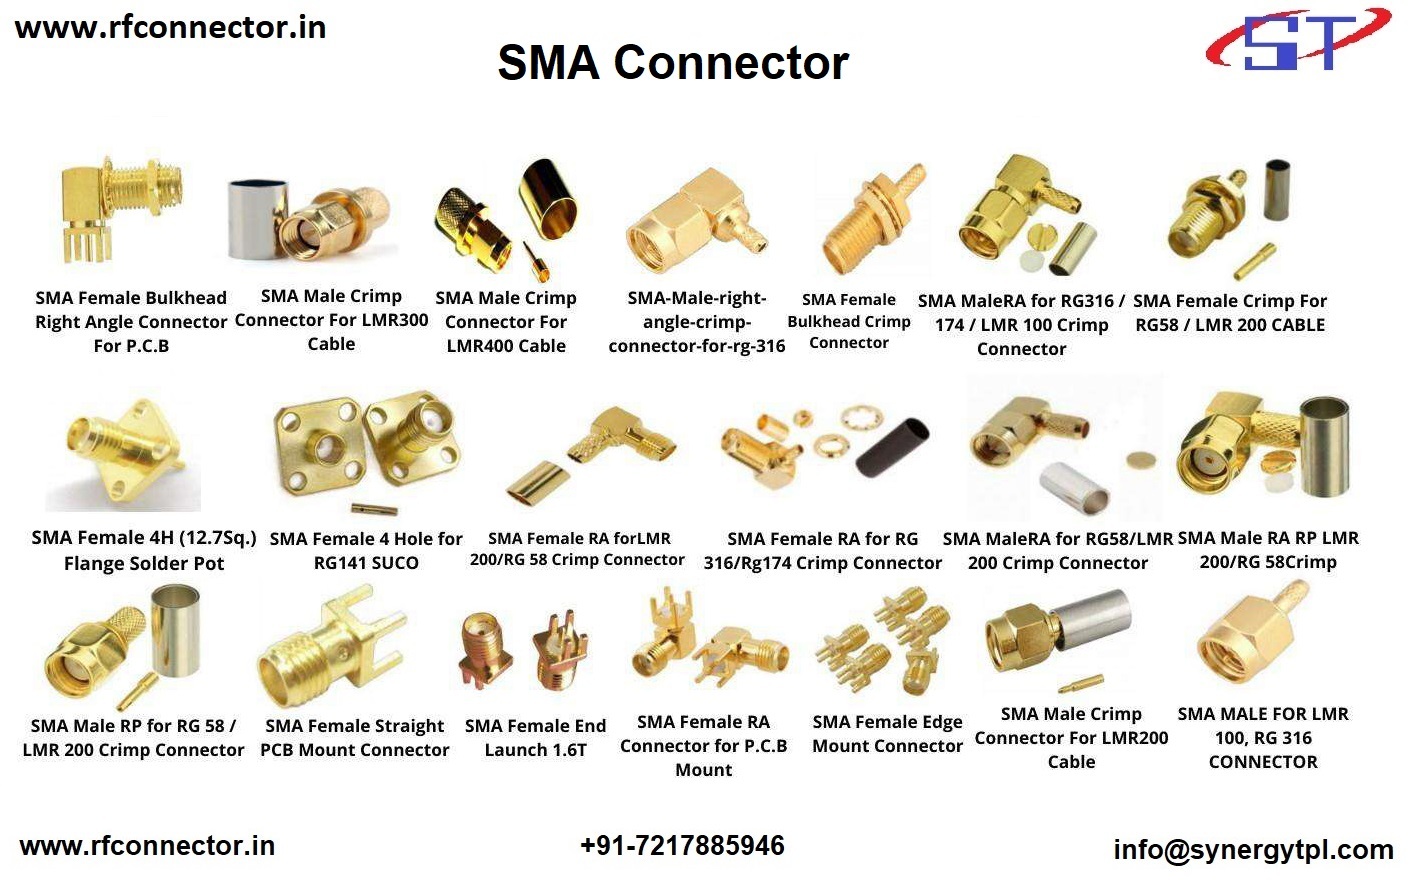 SMA female 4 hole connector for RG 141 cable